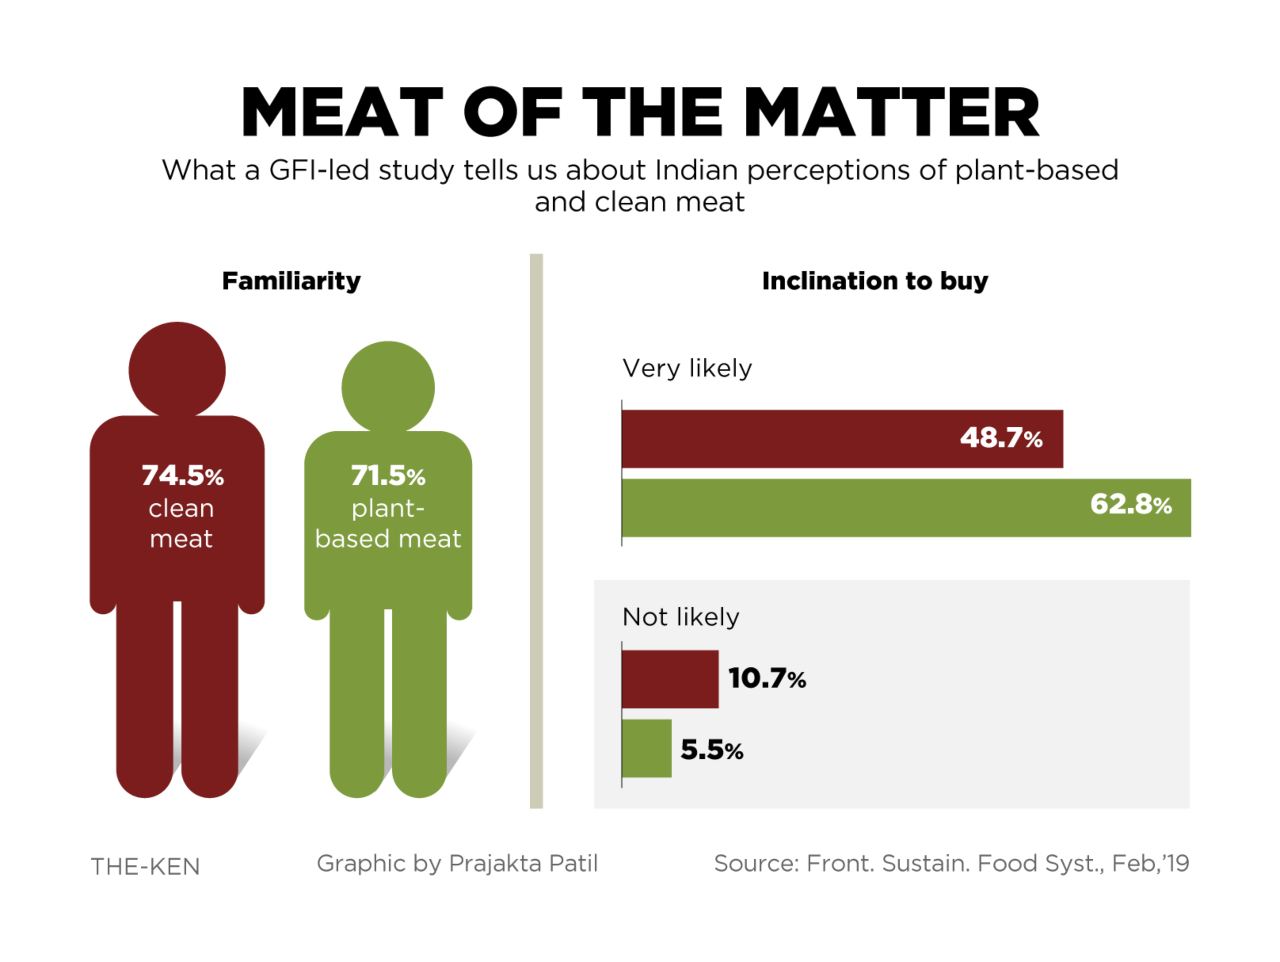 The Meat of the Matter, an illustration on plant-based mean and clean meat. Image: GFI/The Ken